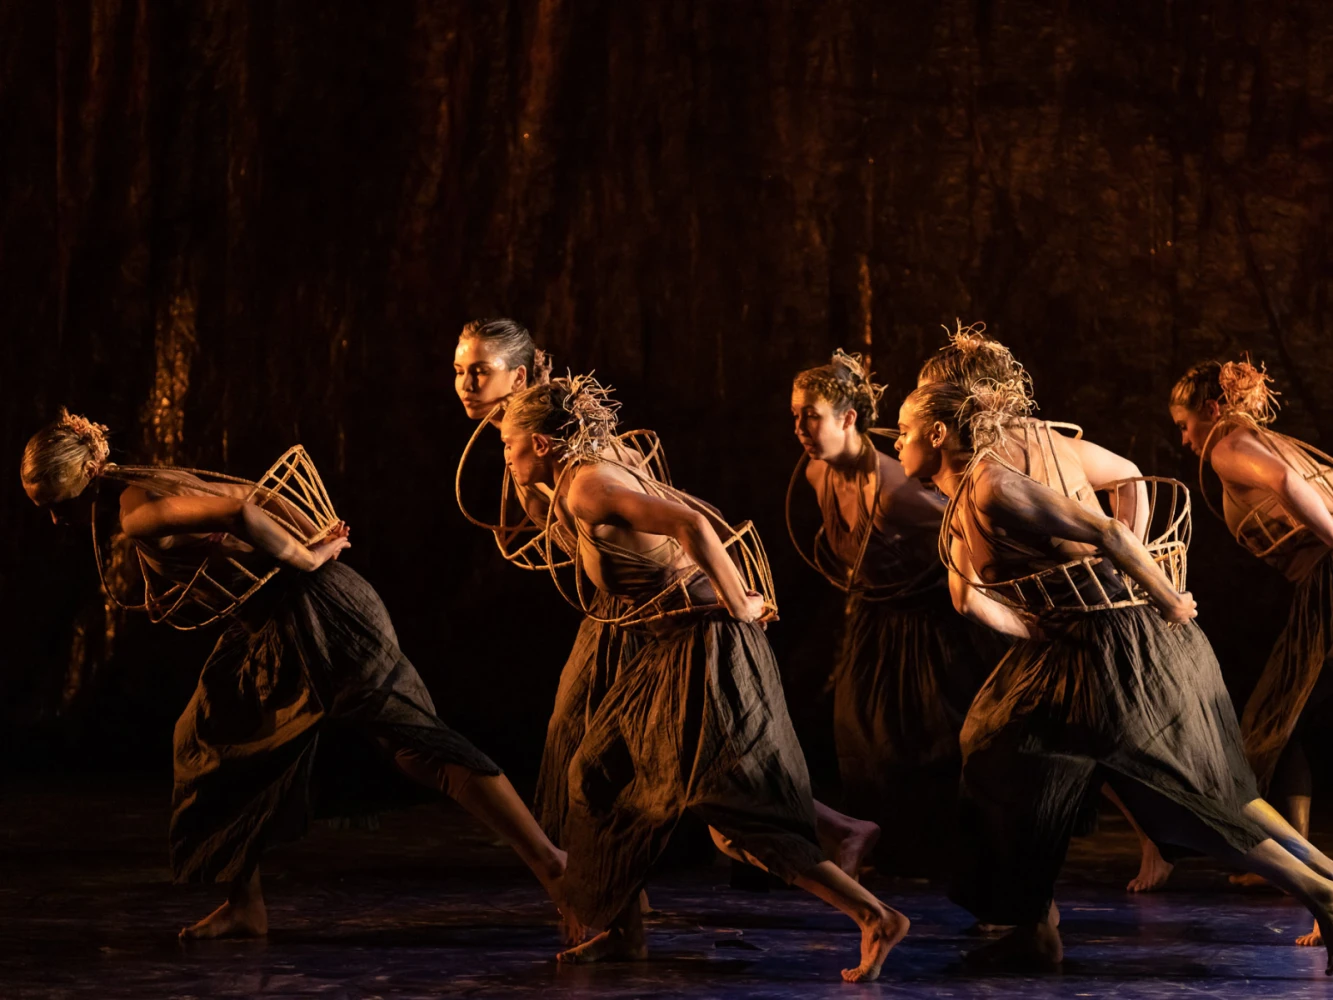 SandSong presented by Bangarra Dance Theatre: What to expect - 7